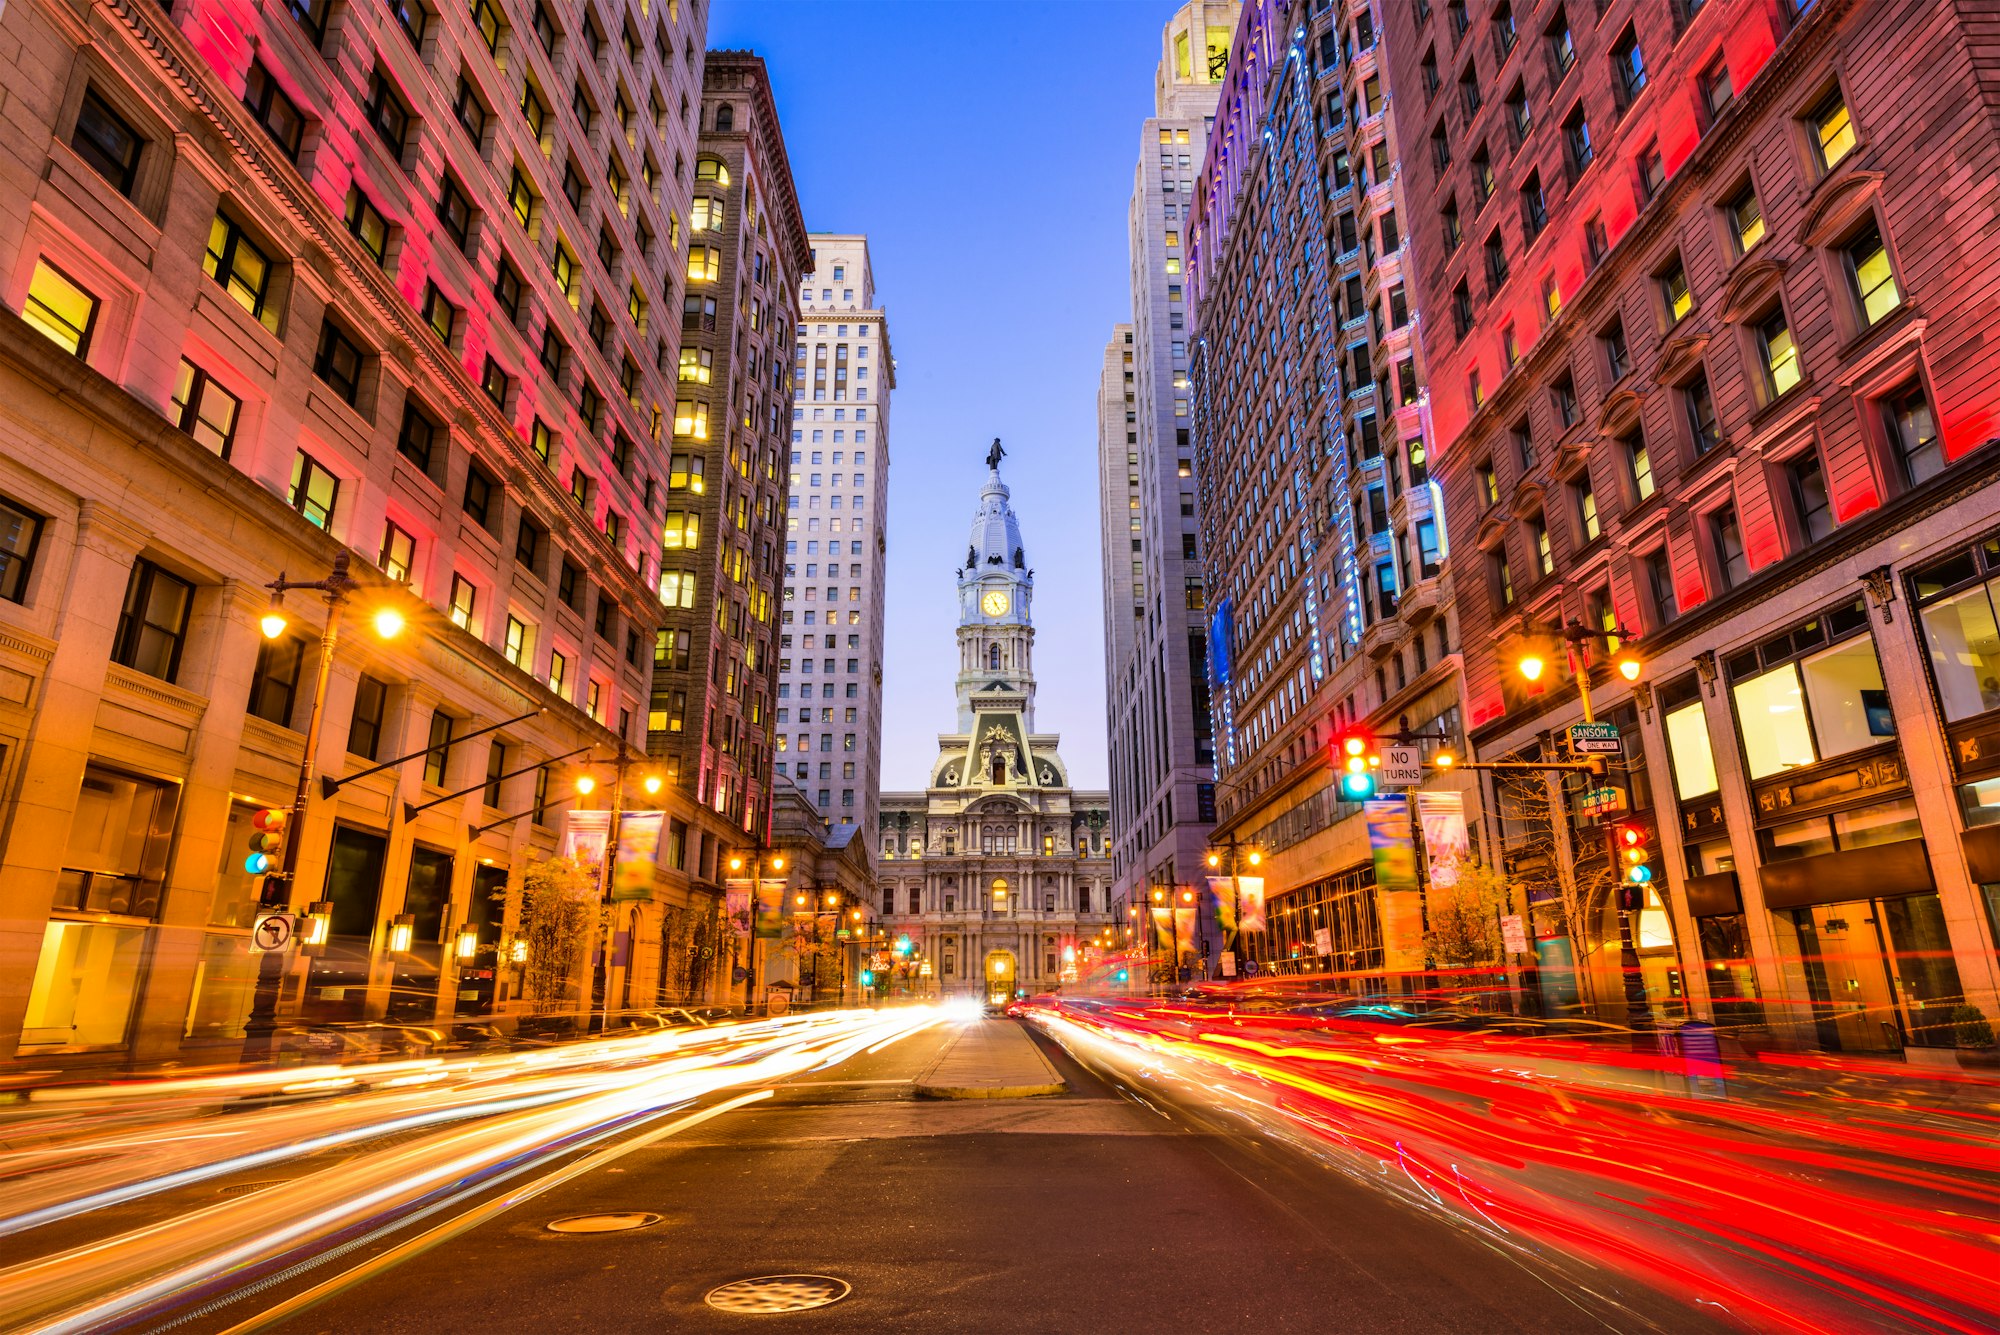 "Iconic view of Broad Street in Philadelphia, representing the local community served by Mayfair Family Dentistry.